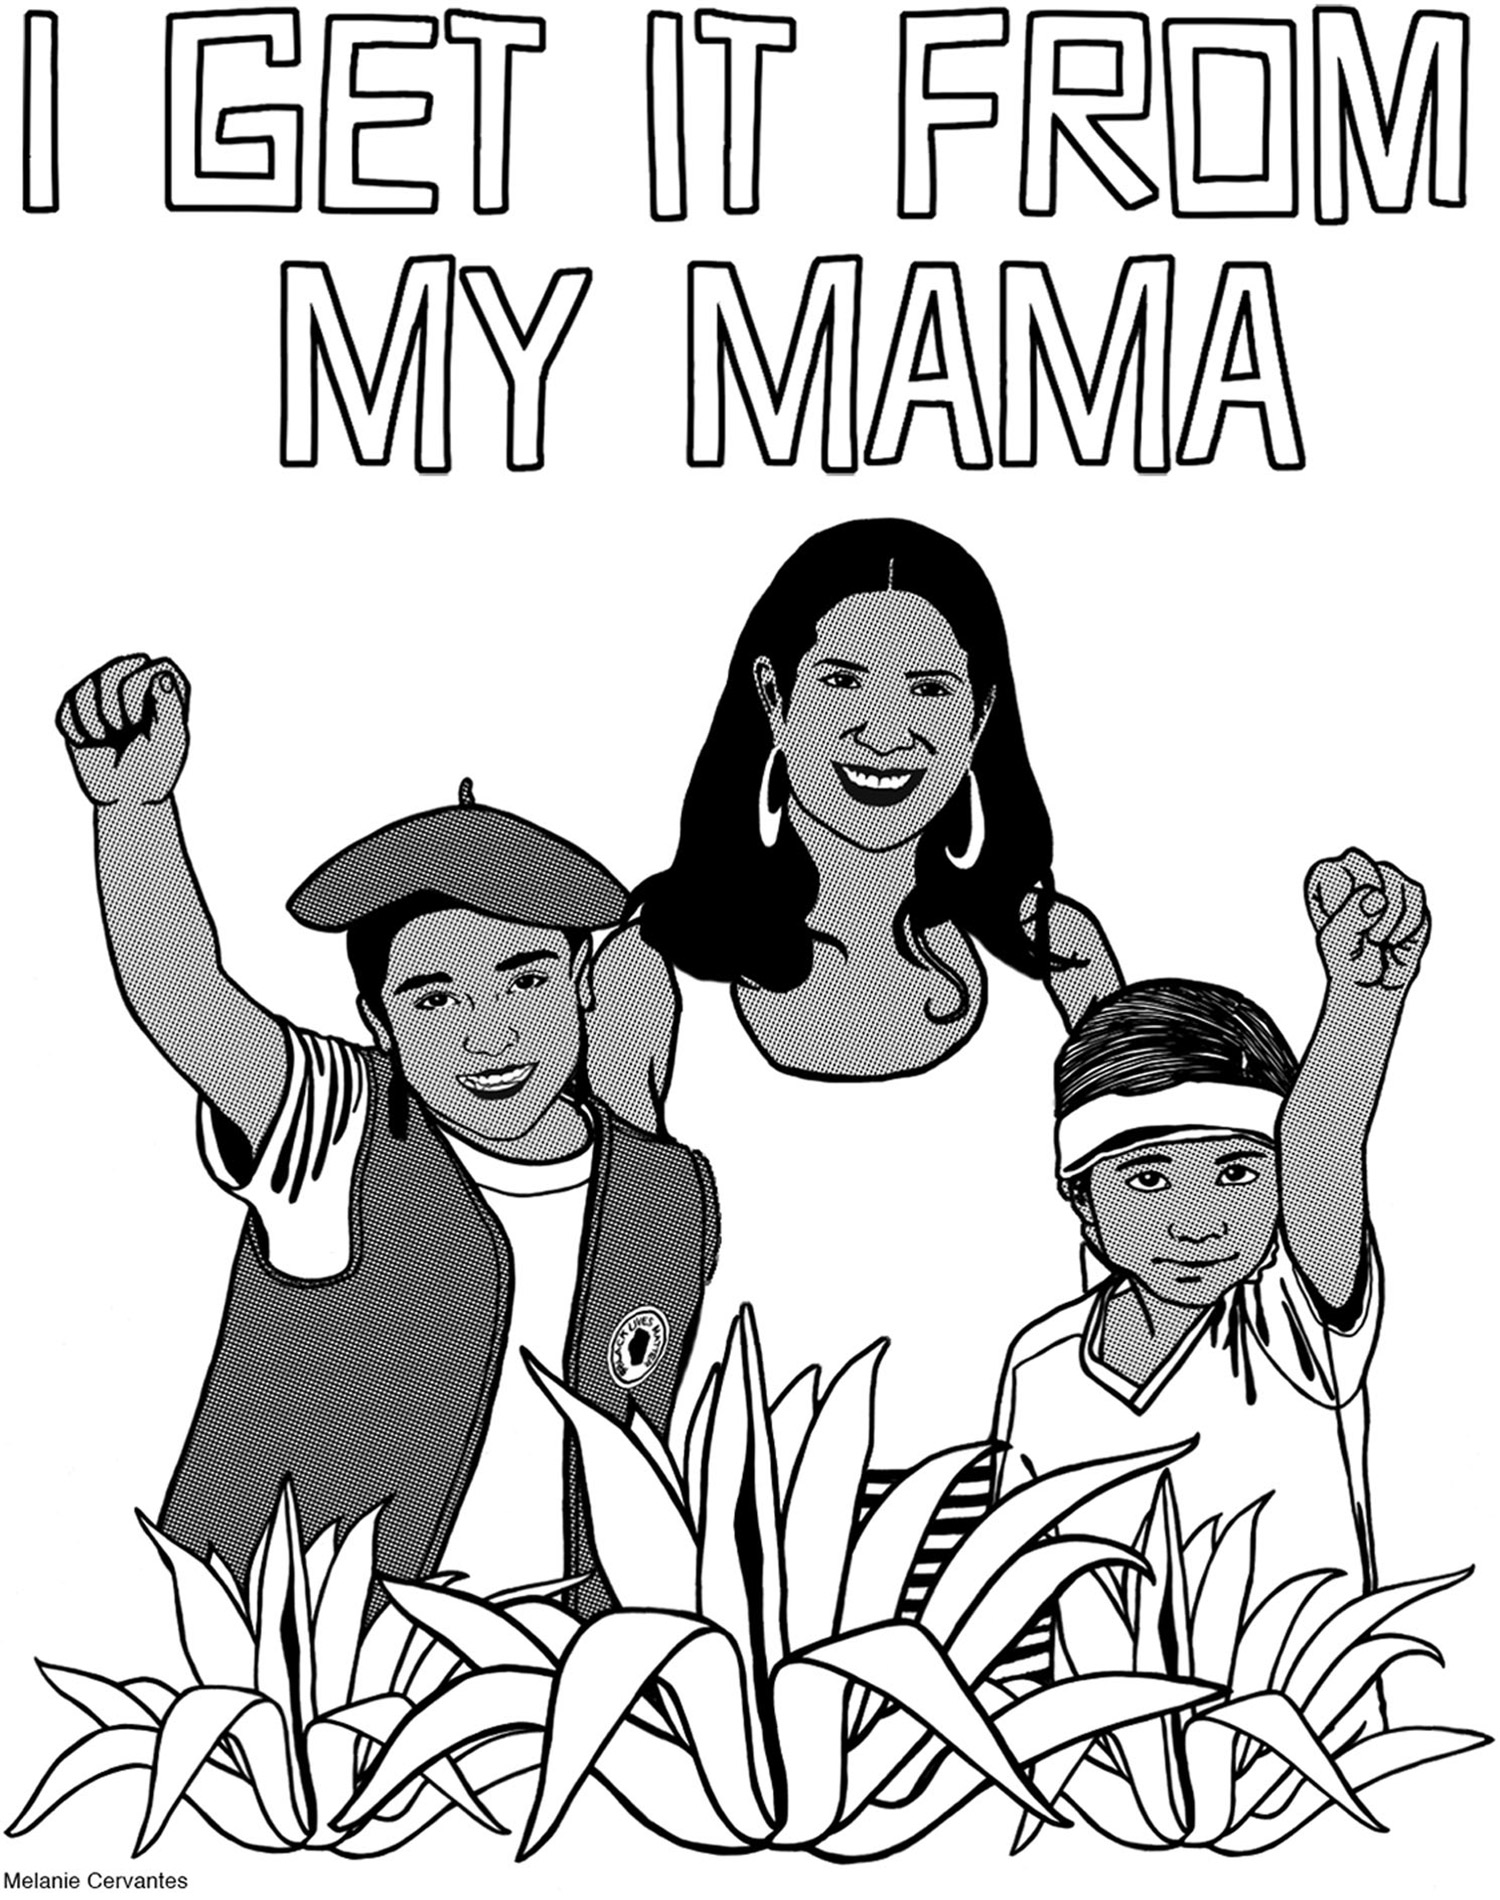 An image of two children with raised fists, in front of their mom and behind three agave plants